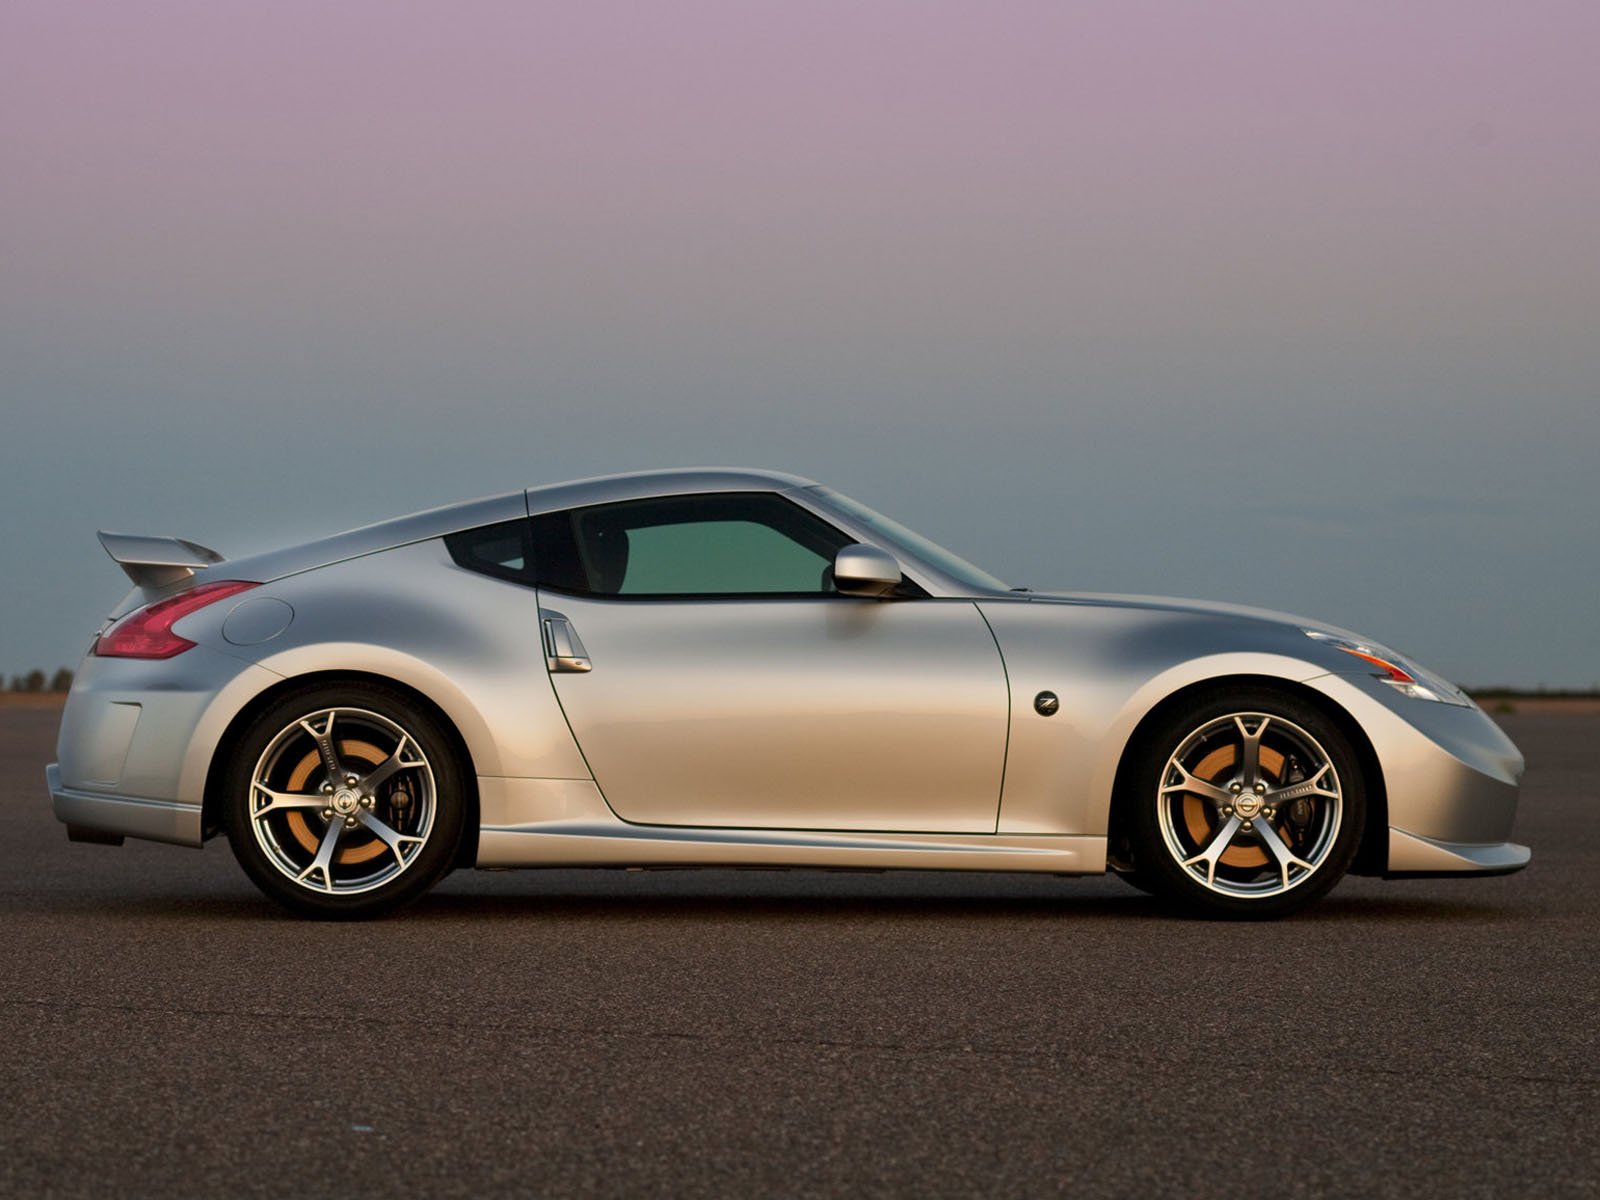 Nissan 370z Wallpaper 4450 Hd Wallpapers in Cars   Imagescicom 1600x1200